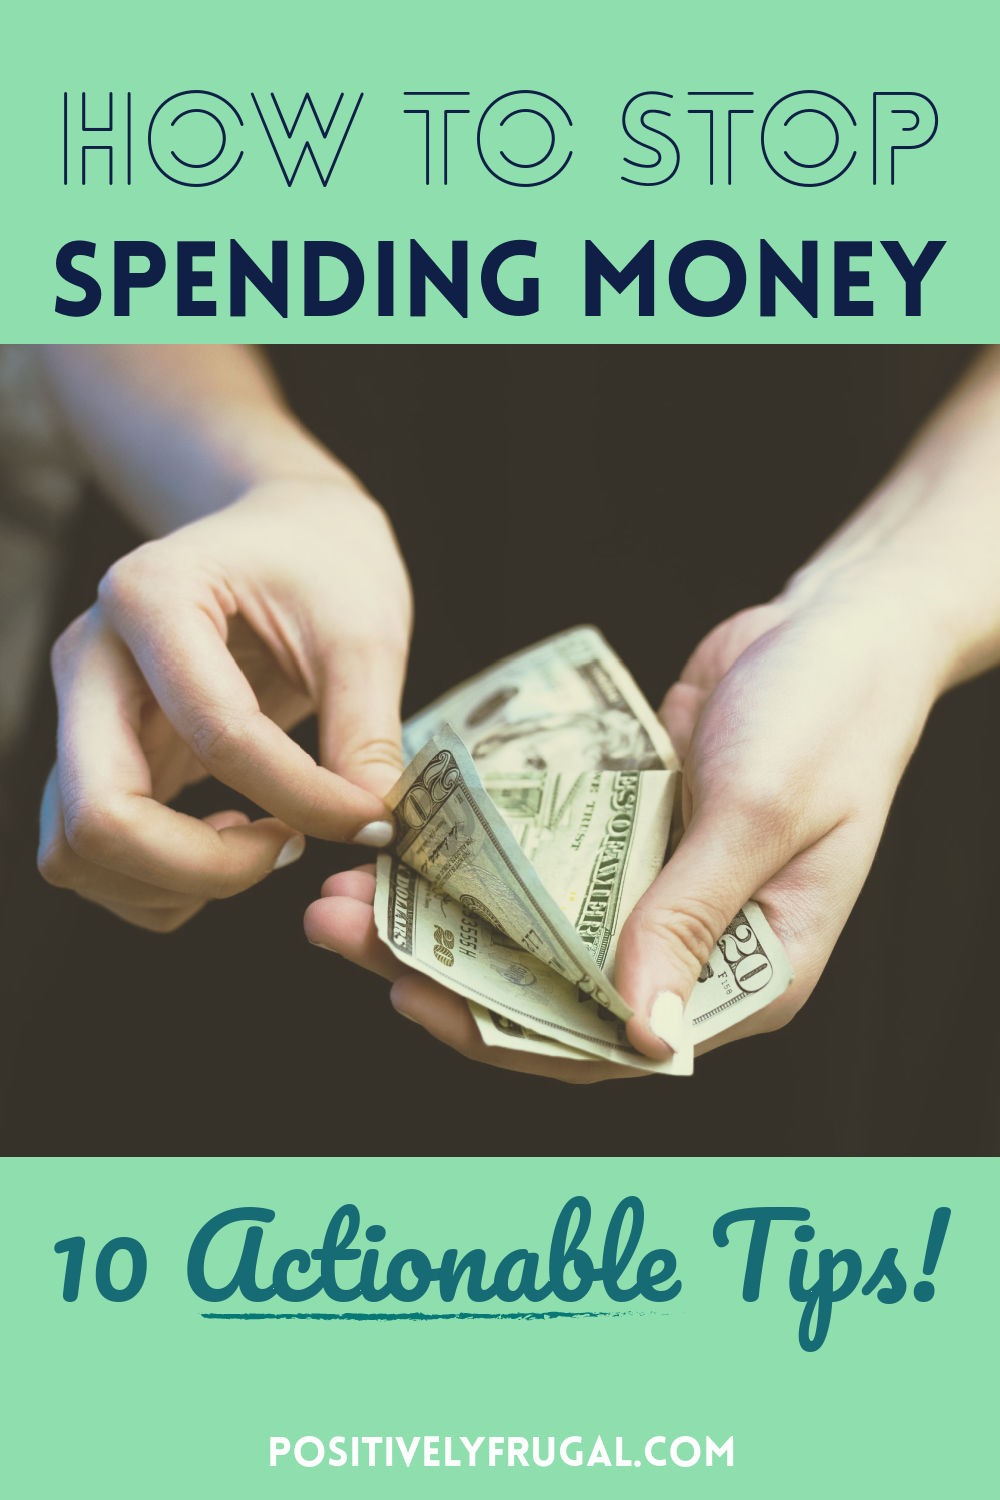 10 Actionable Tips for How To Stop Spending Money by PositivelyFrugal.com